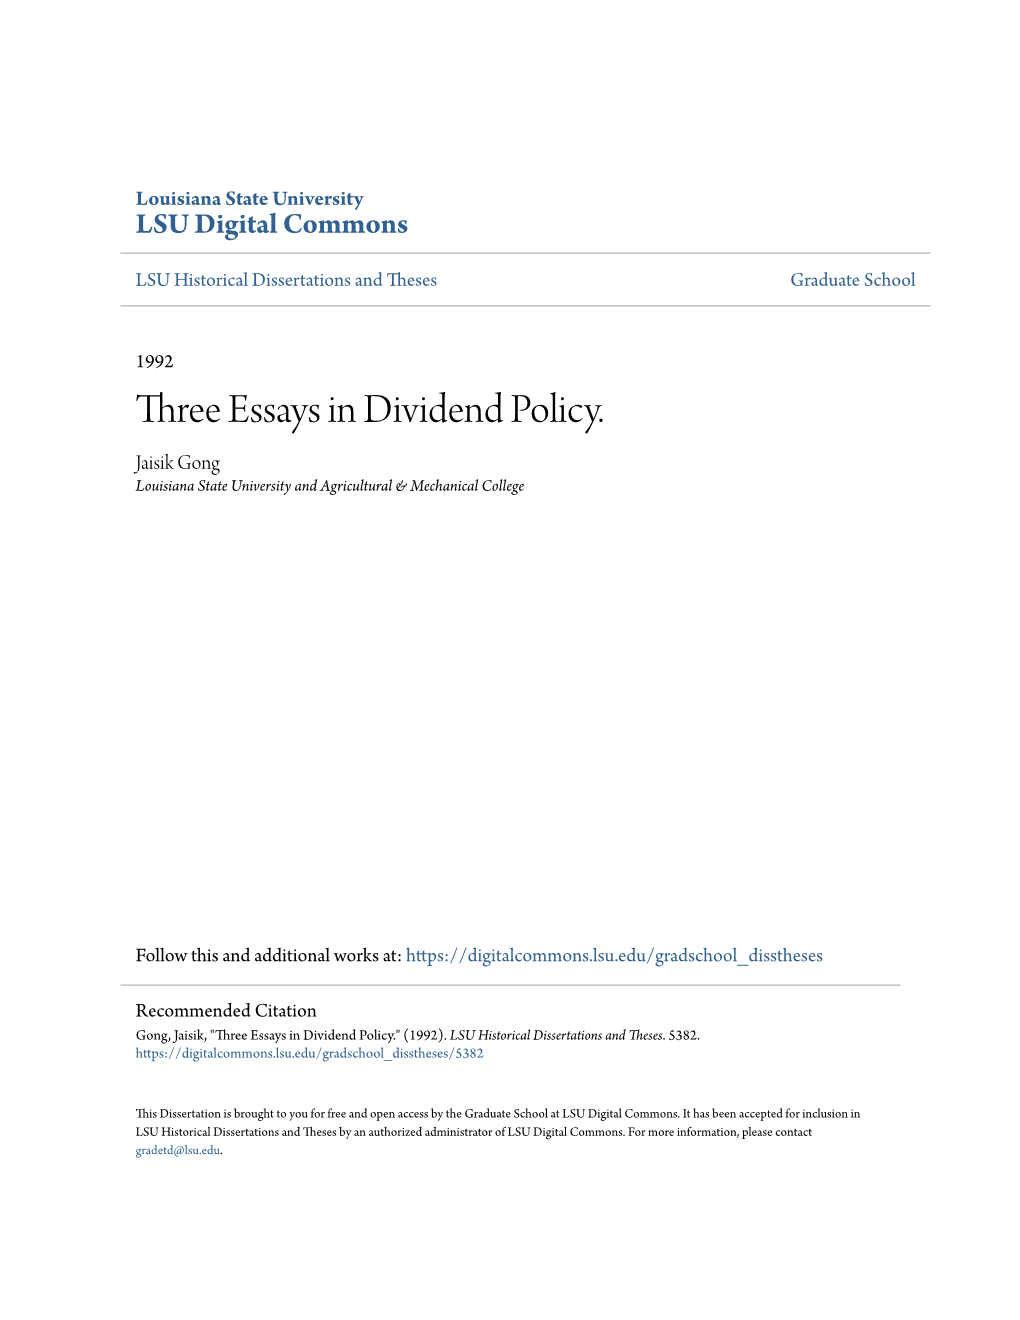 Three Essays in Dividend Policy. Jaisik Gong Louisiana State University and Agricultural & Mechanical College